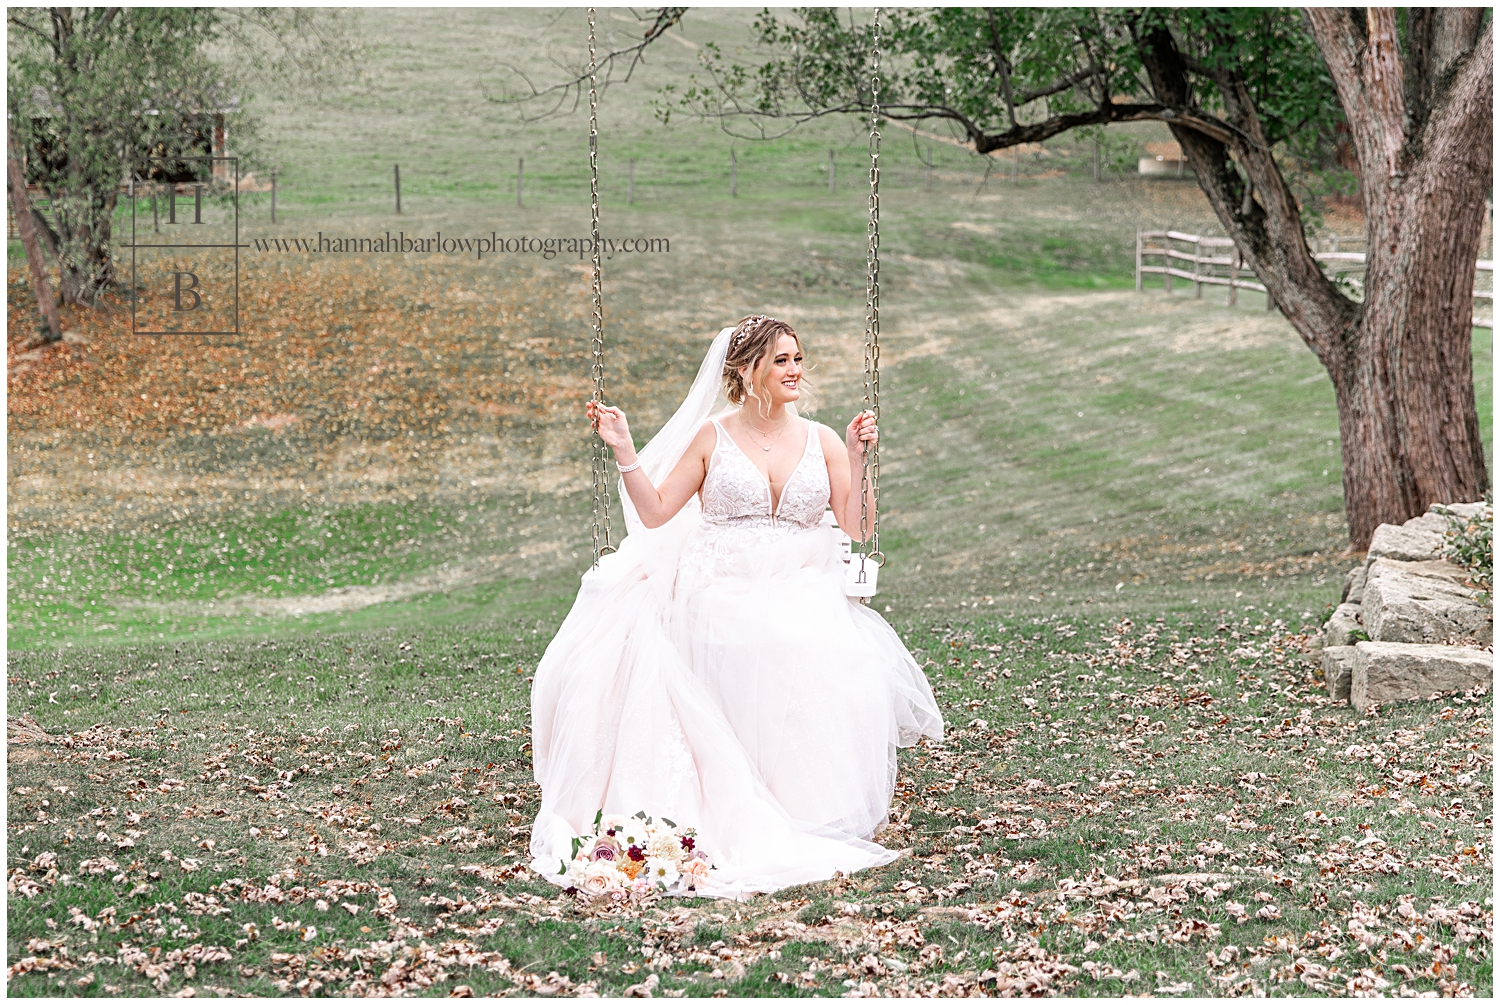 Bride in gown sits on swing and smiles.